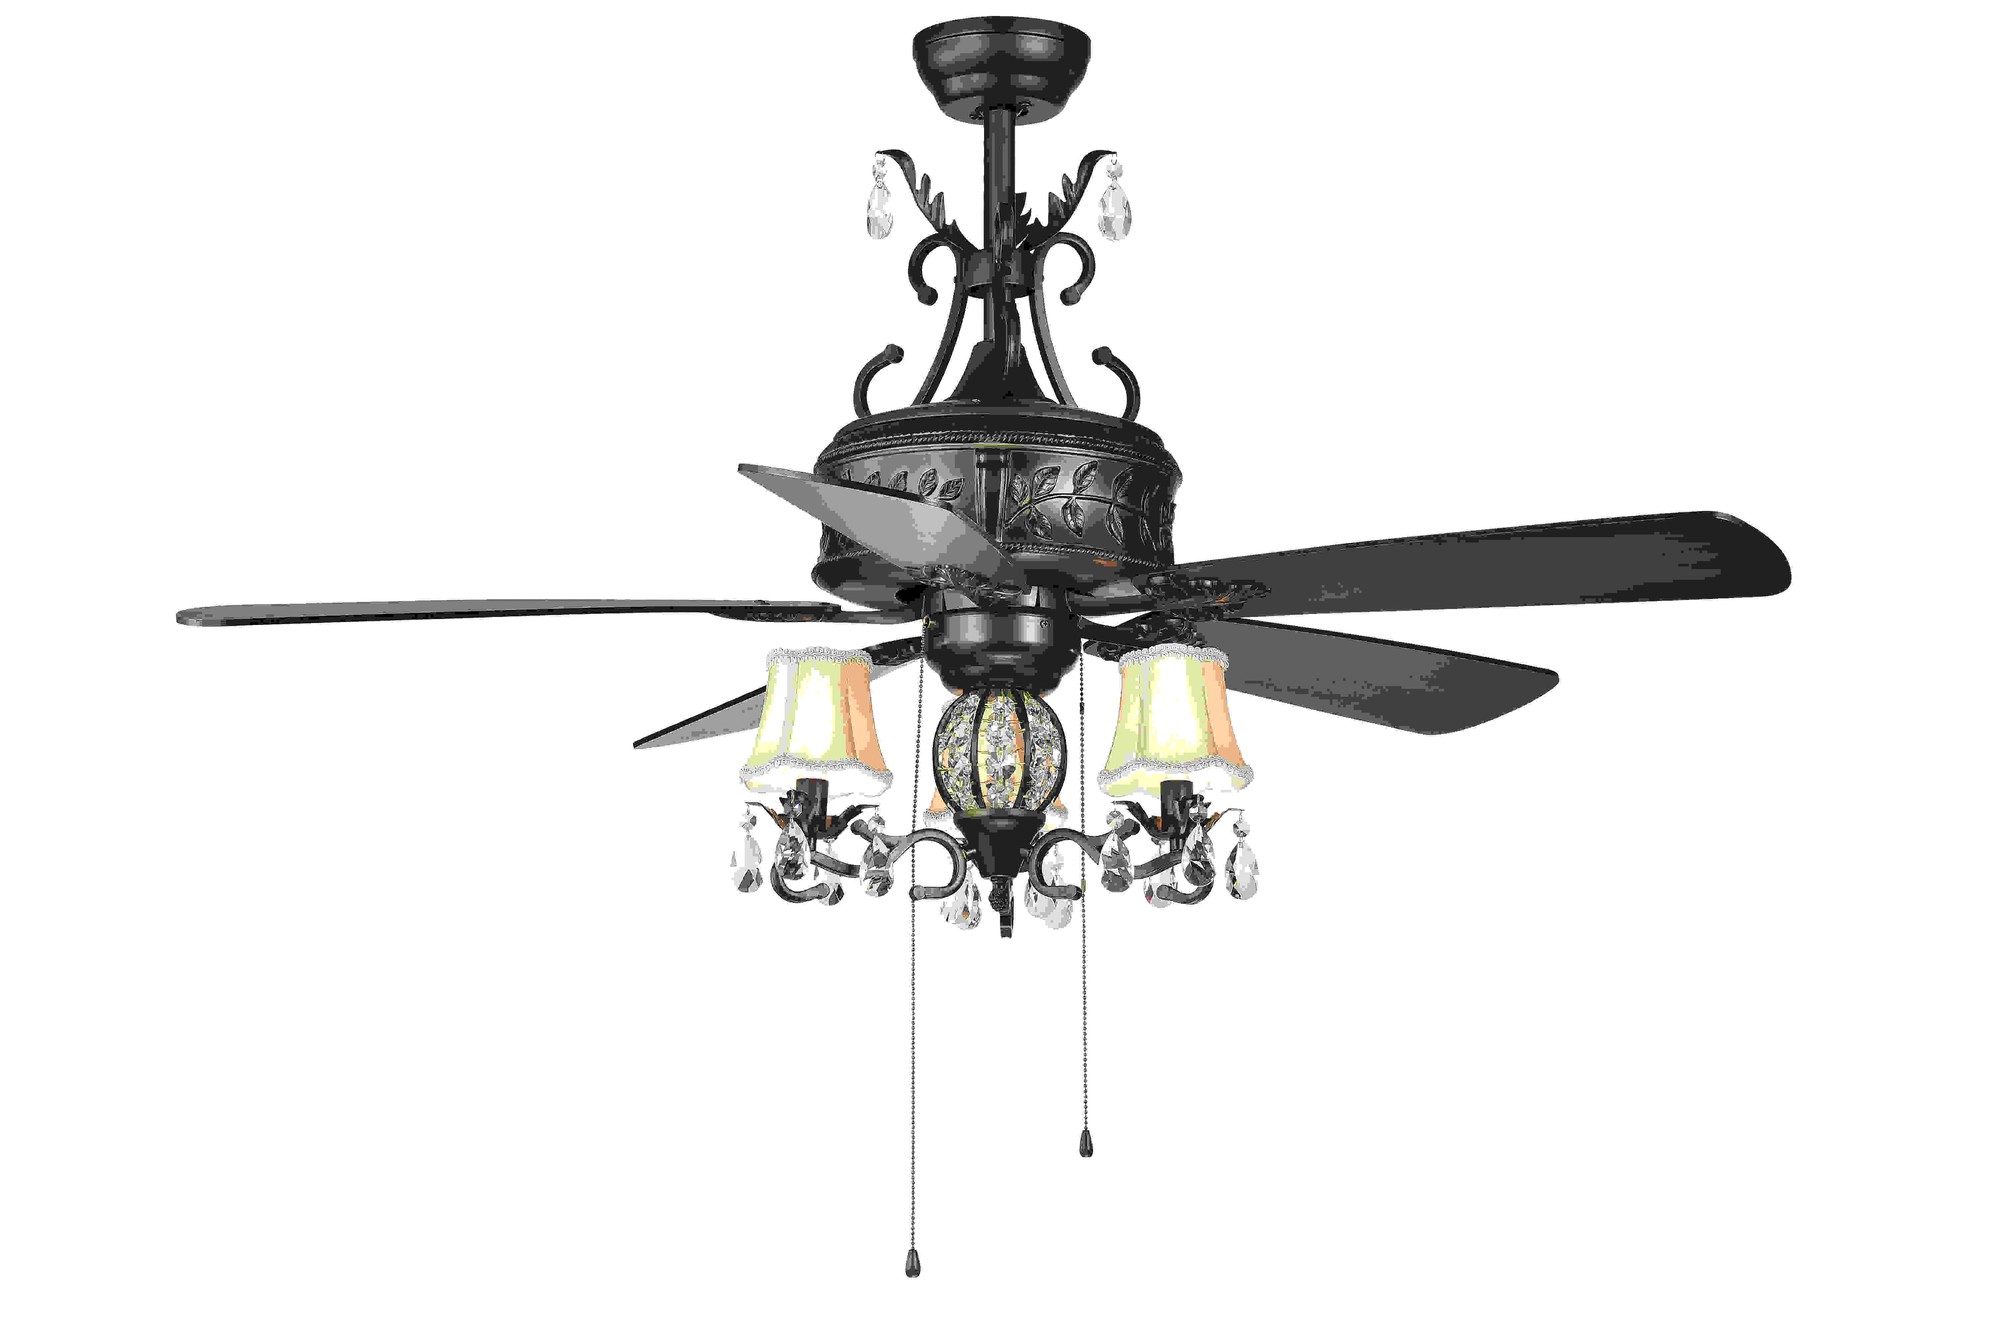 Firtha 52-Inch 5-Blade Antique Lighted Ceiling Fans with Branched French Chandelier (Optional Remote)